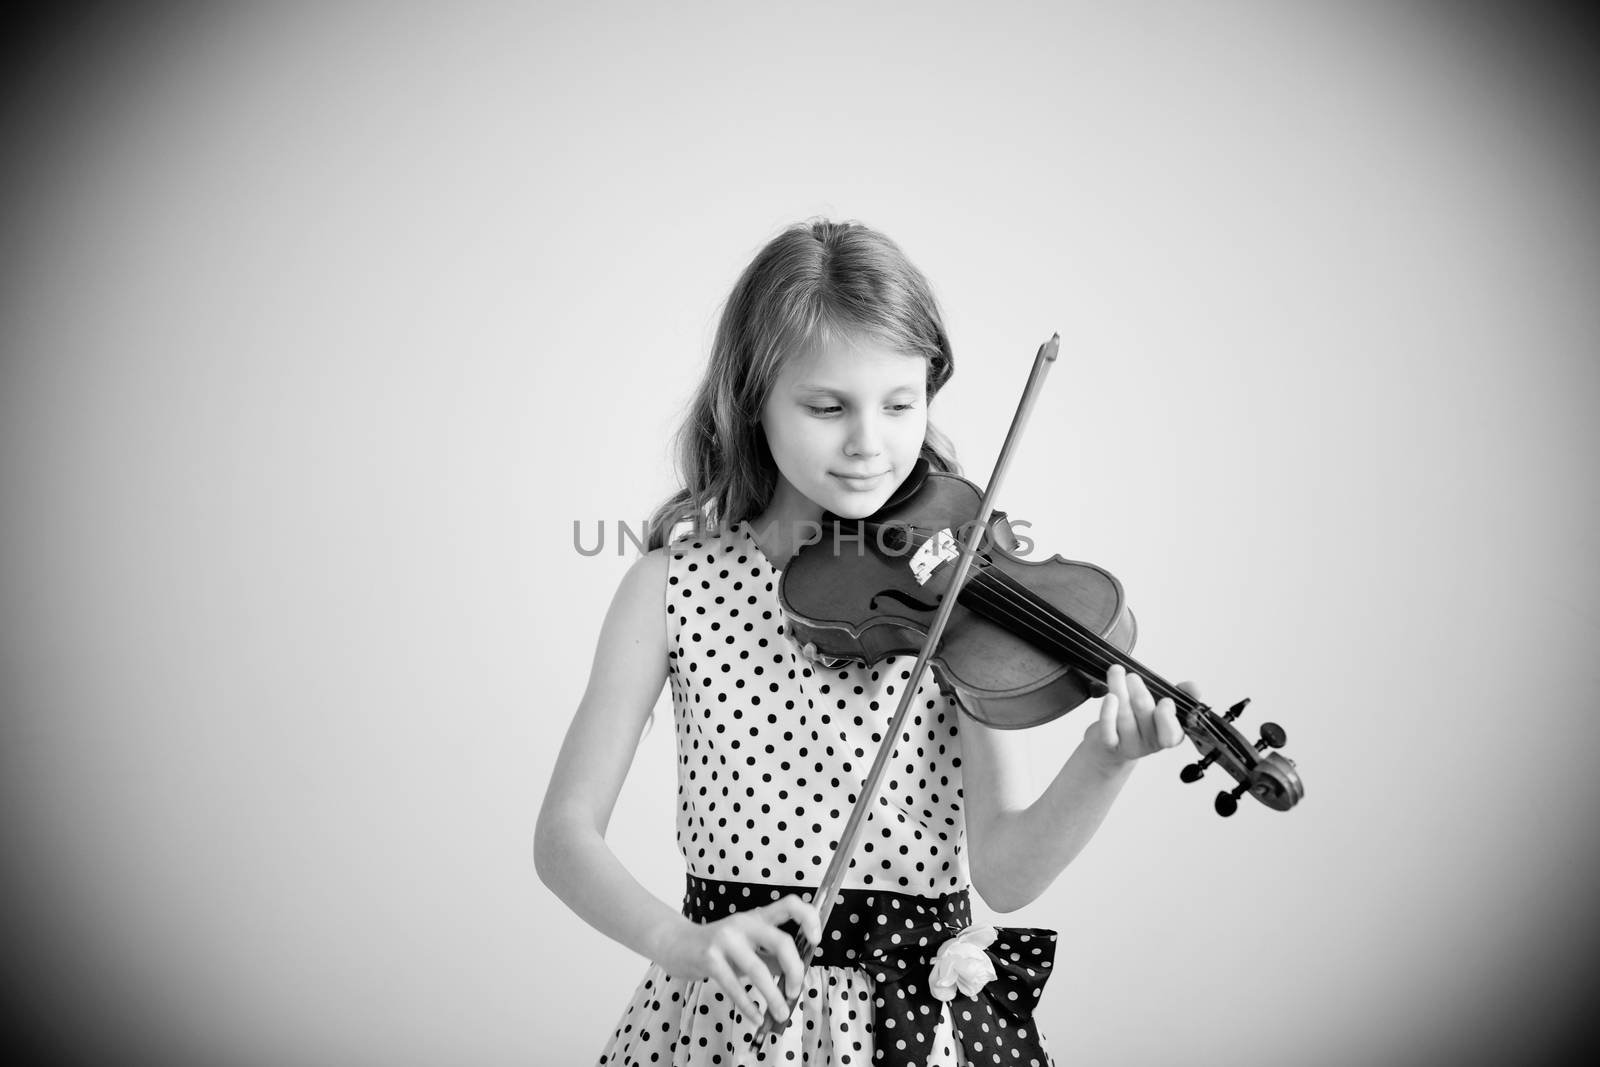 Portrait of girl with string and playing violin. Portrait of the little violinist. Beautiful gifted little girl playing on violin against the white background